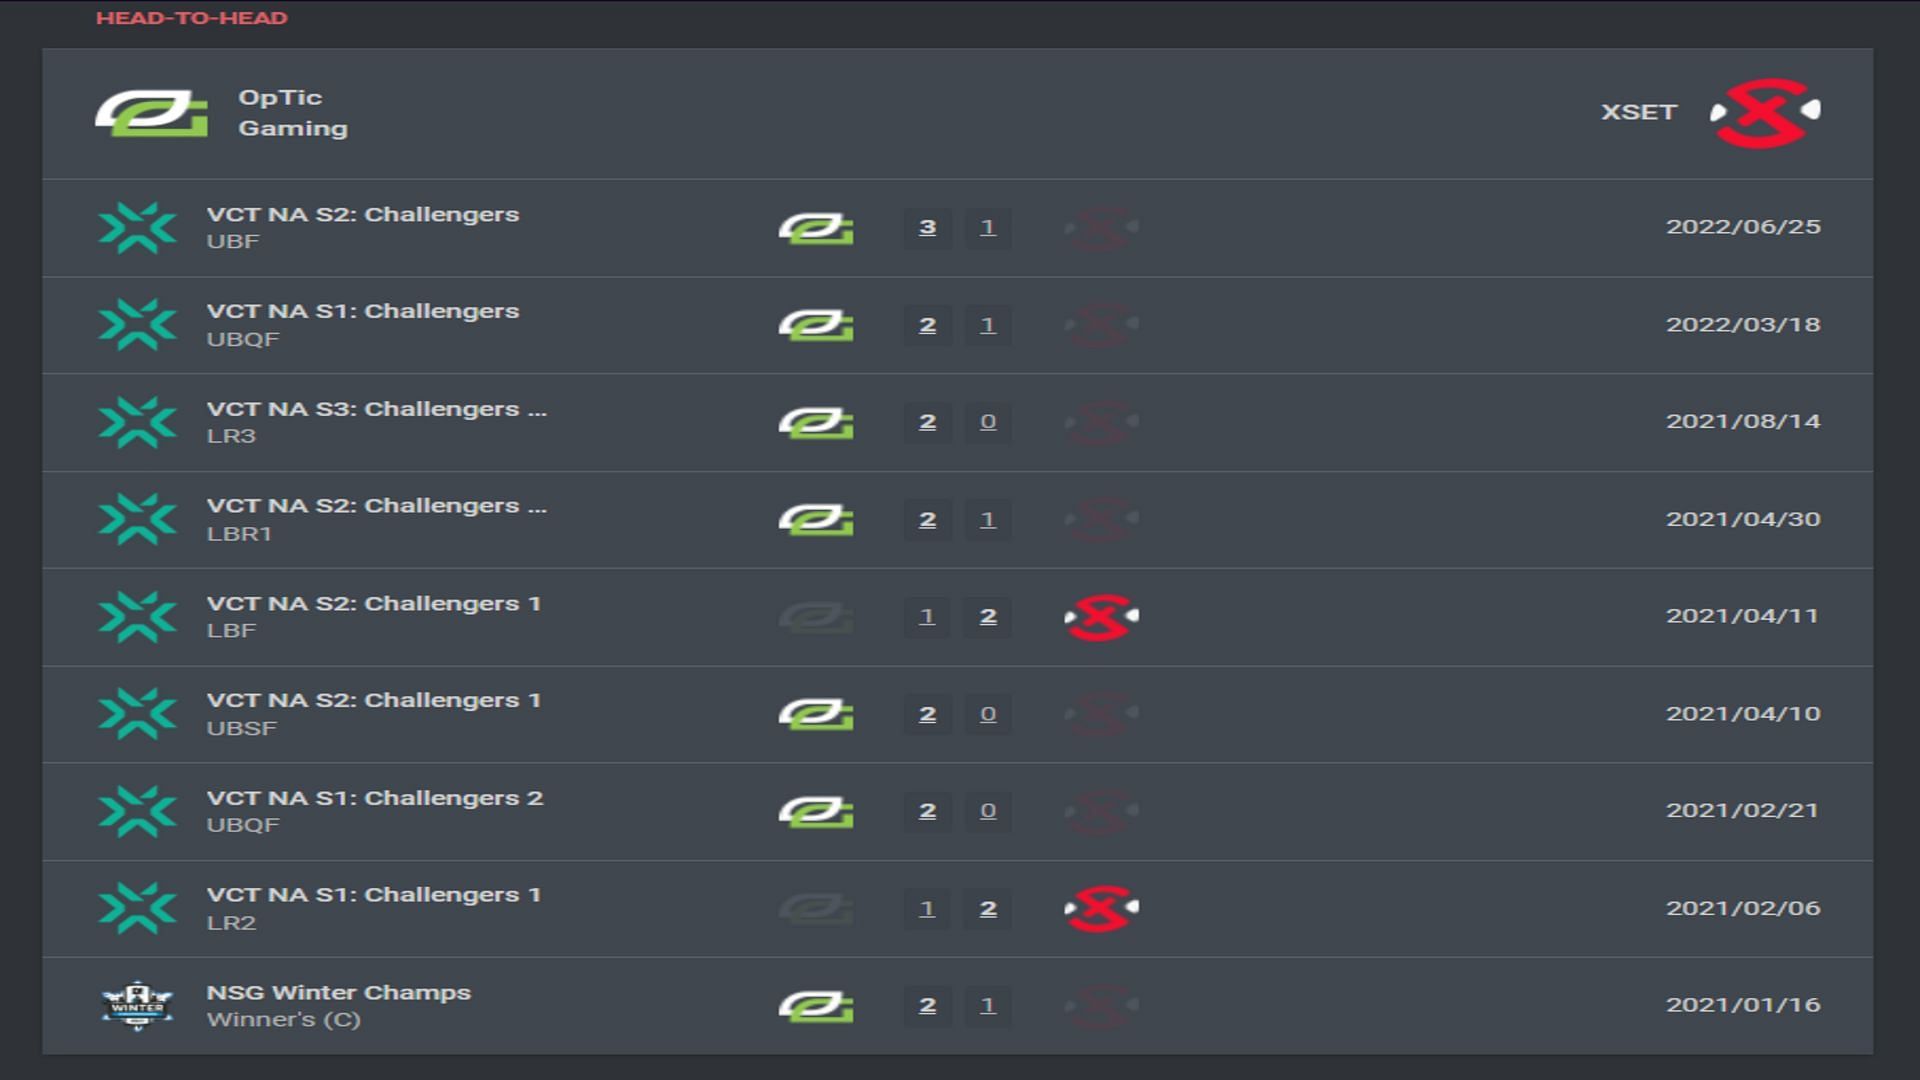 head to head results between OpTic Gaming and XSET (Image via VLR.gg)